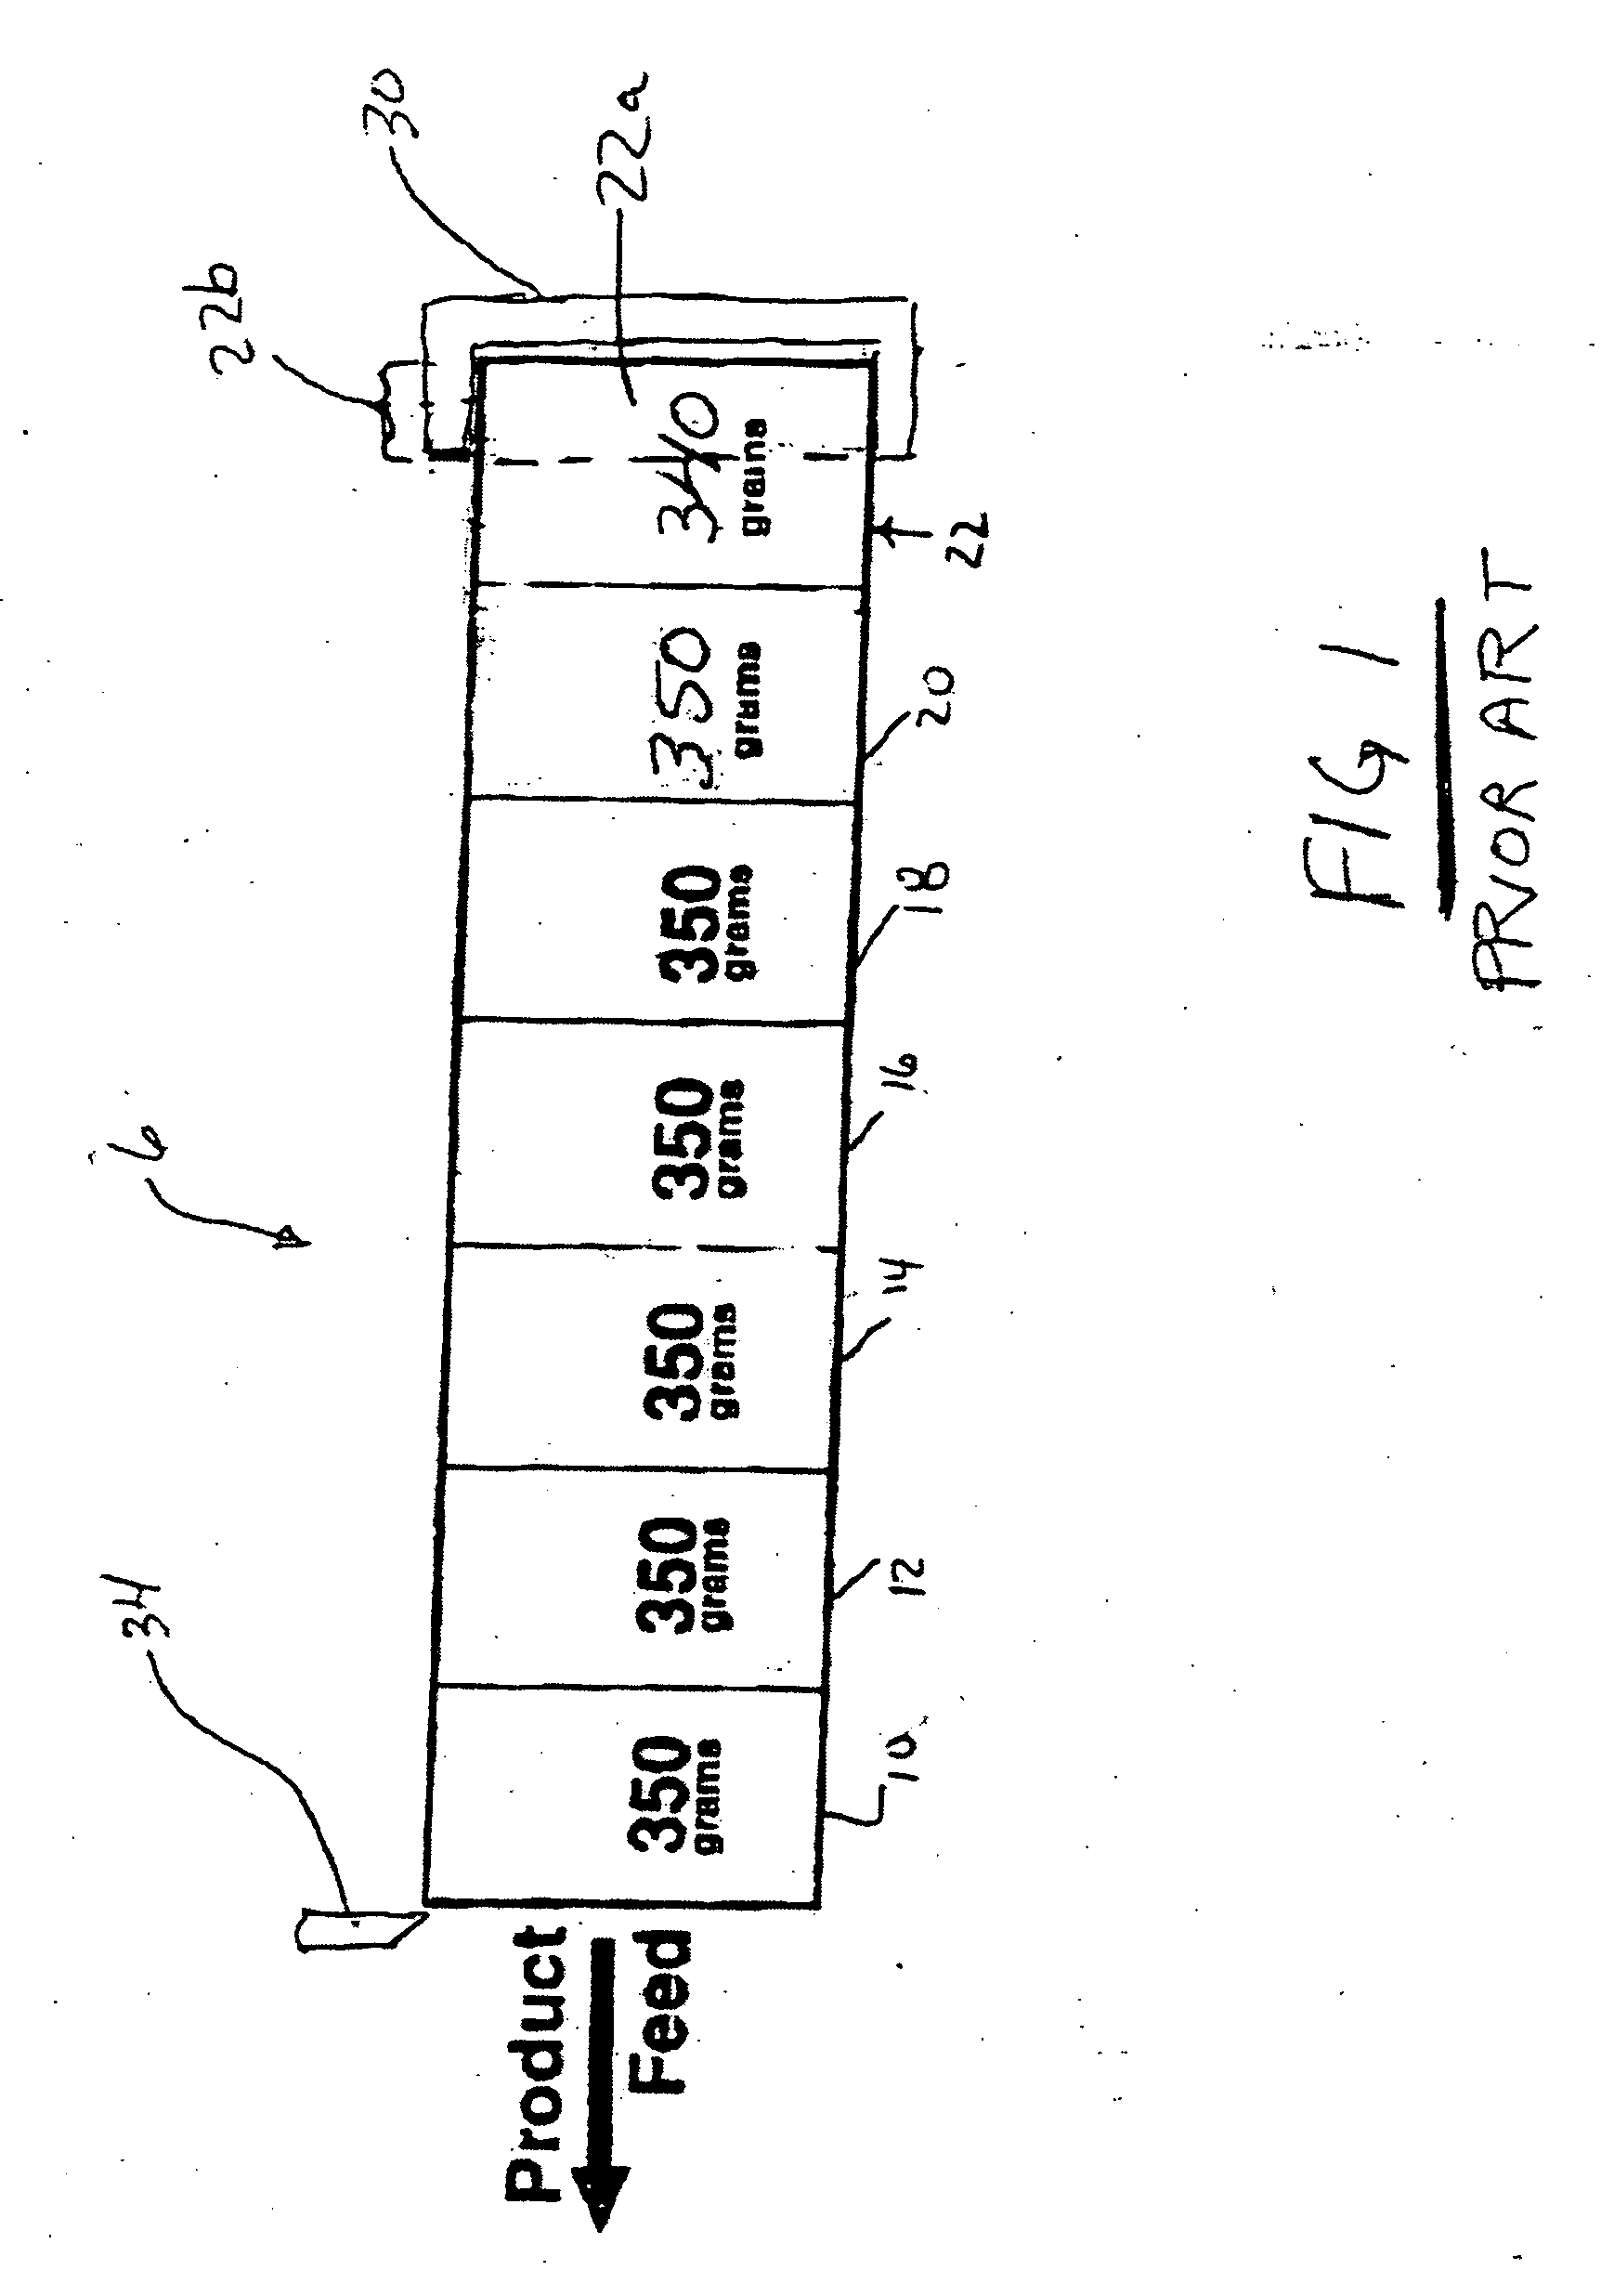 System and apparatus for optimizing slices from slicing apparatus